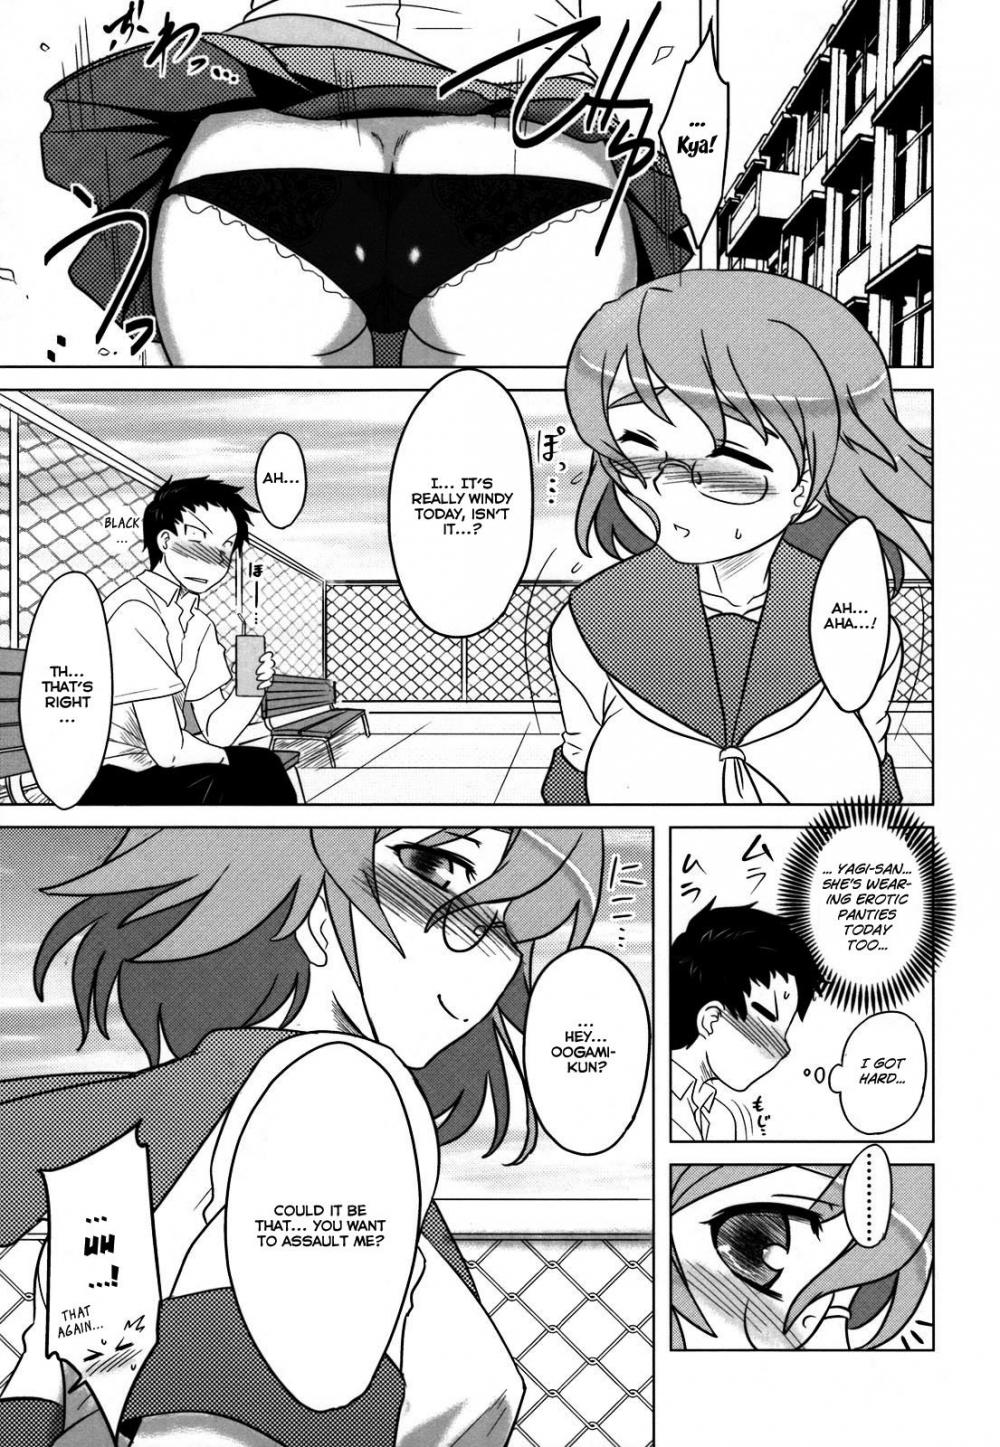 Hentai Manga Comic-Whenever You Touch Me-Chapter 6-1